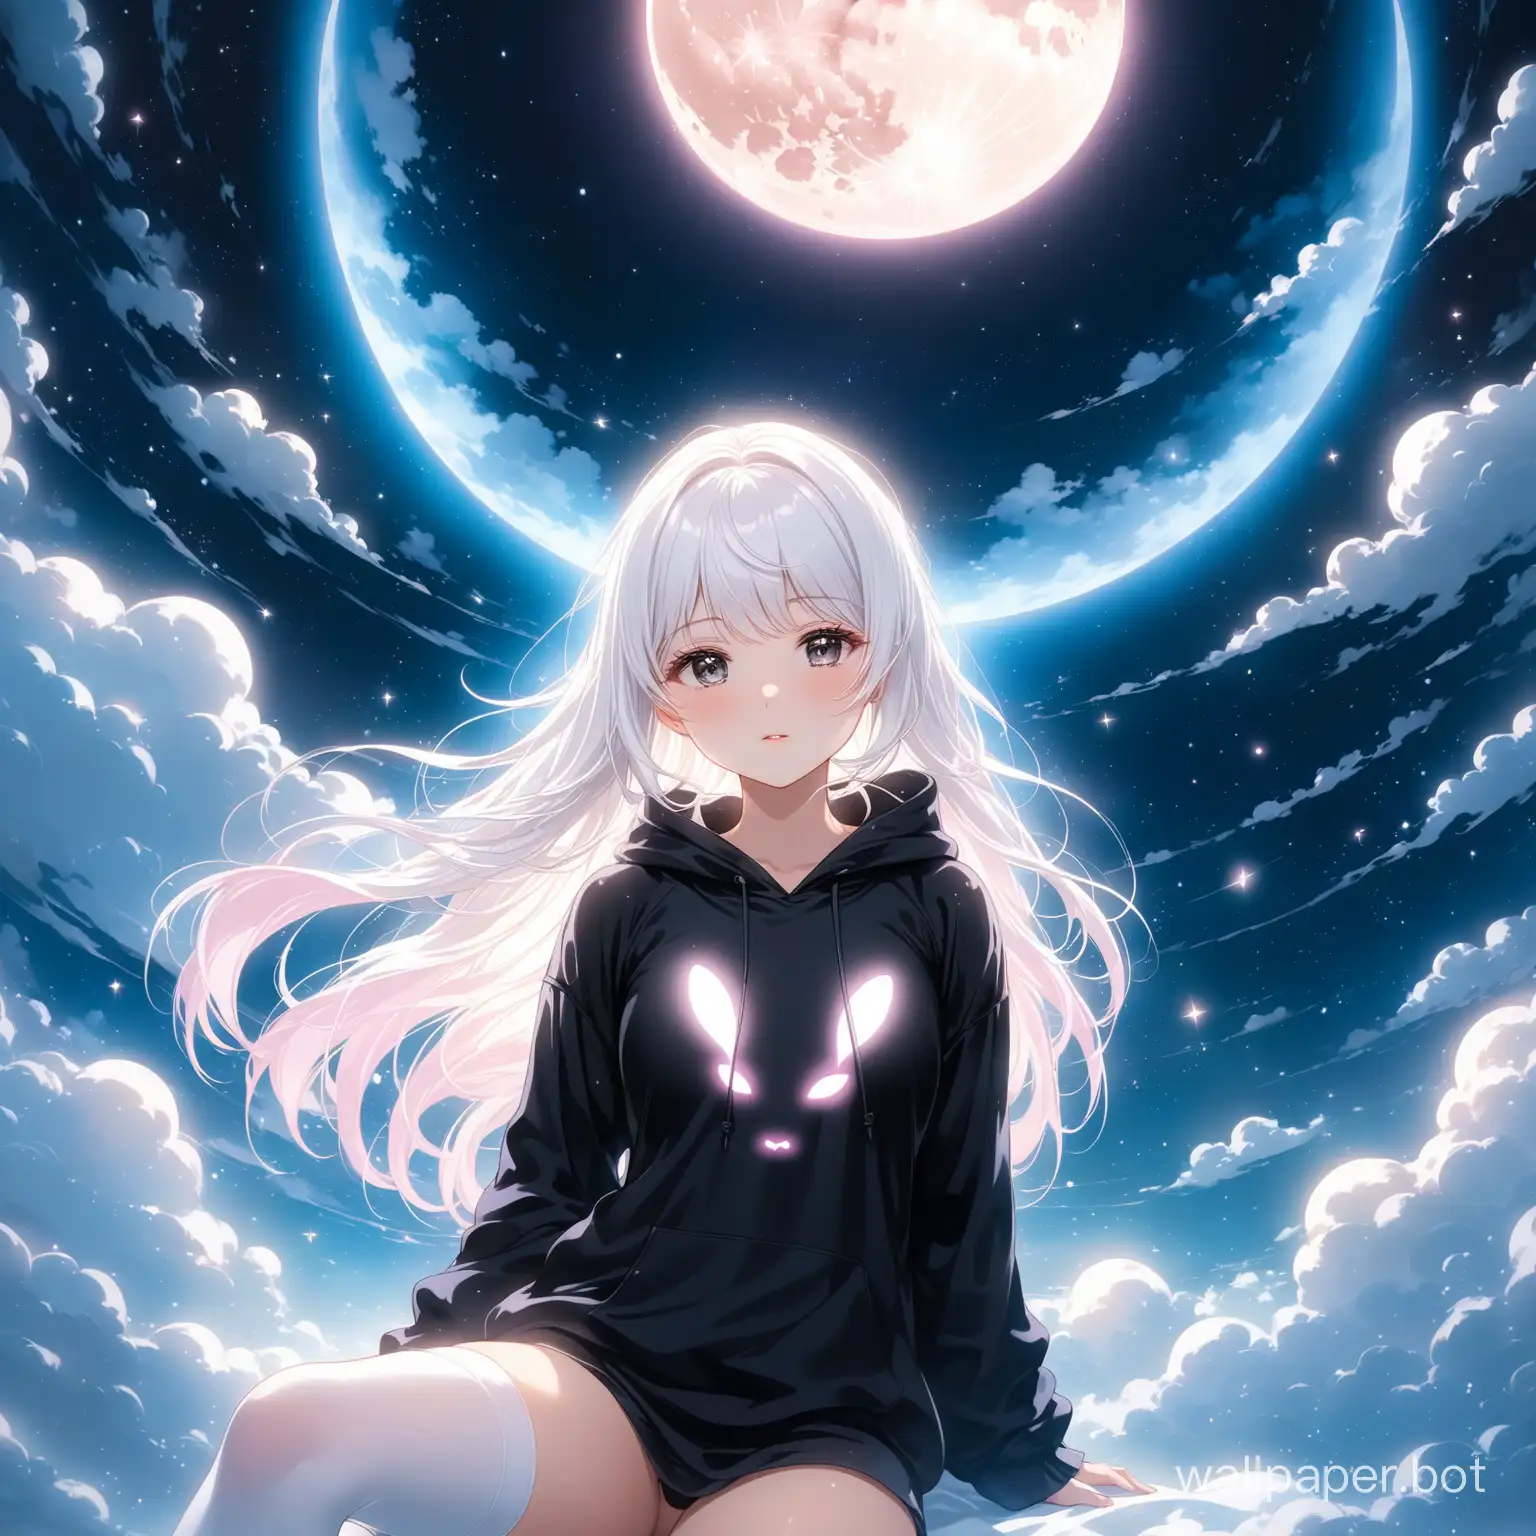 Ethereal-Goddess-with-White-Hair-in-Bunny-Hoodie-Under-Moonlight